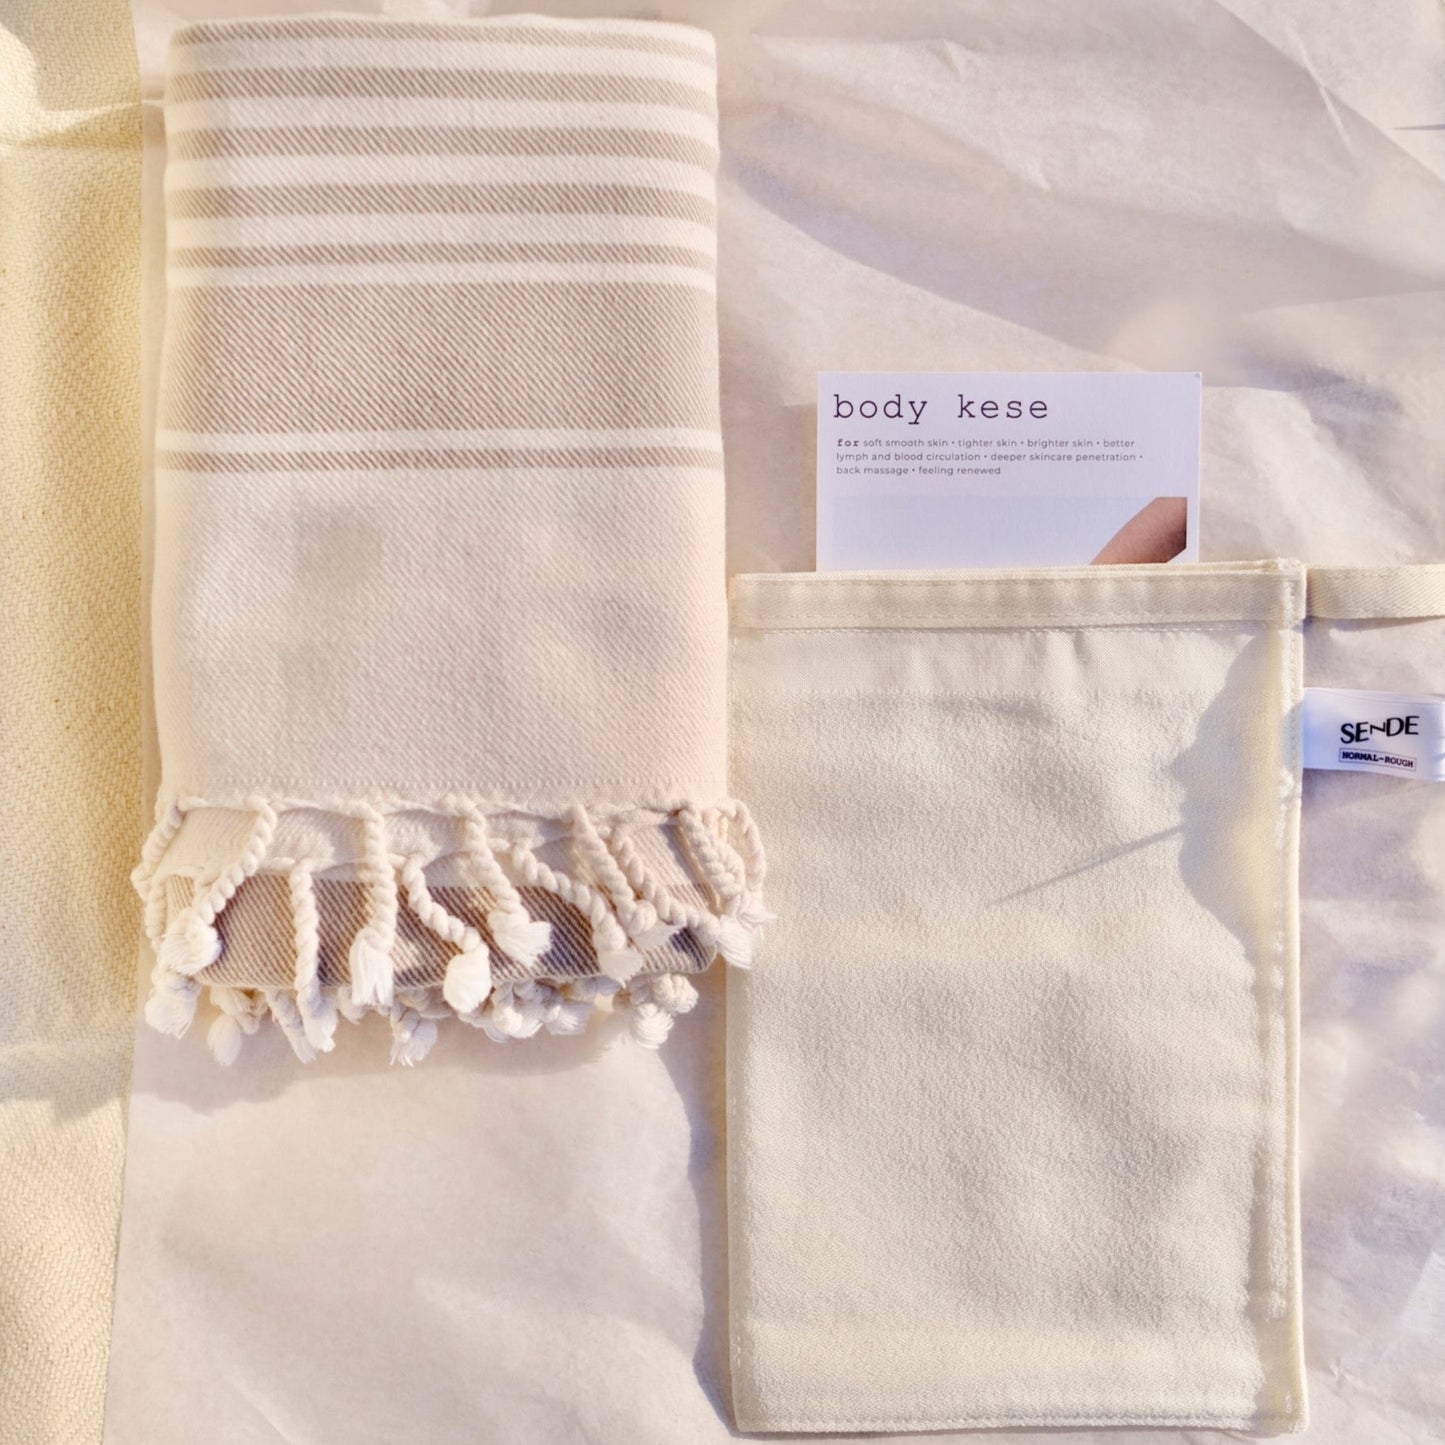 SENDE Turkish towel and exfoliating mitt by SENDE for an At-home hammam Turkish spa bath experience. Flat lay showing SENDE pestemal and body exfoliating kese with instruction card.